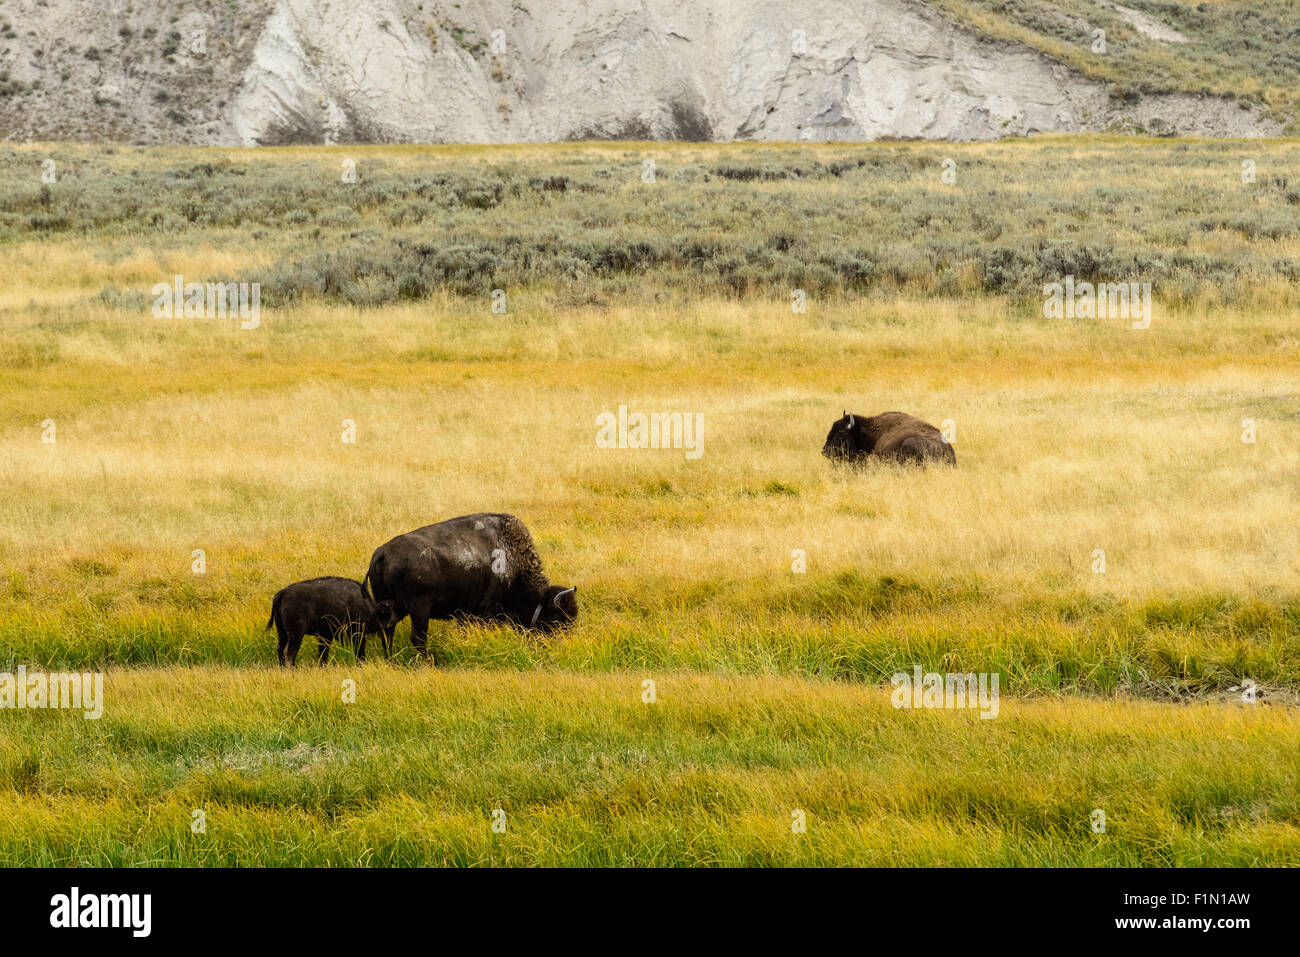 Images of the buffalo herd from Hayden Valley, in Yellowstone National Park, WY. Stock Photo